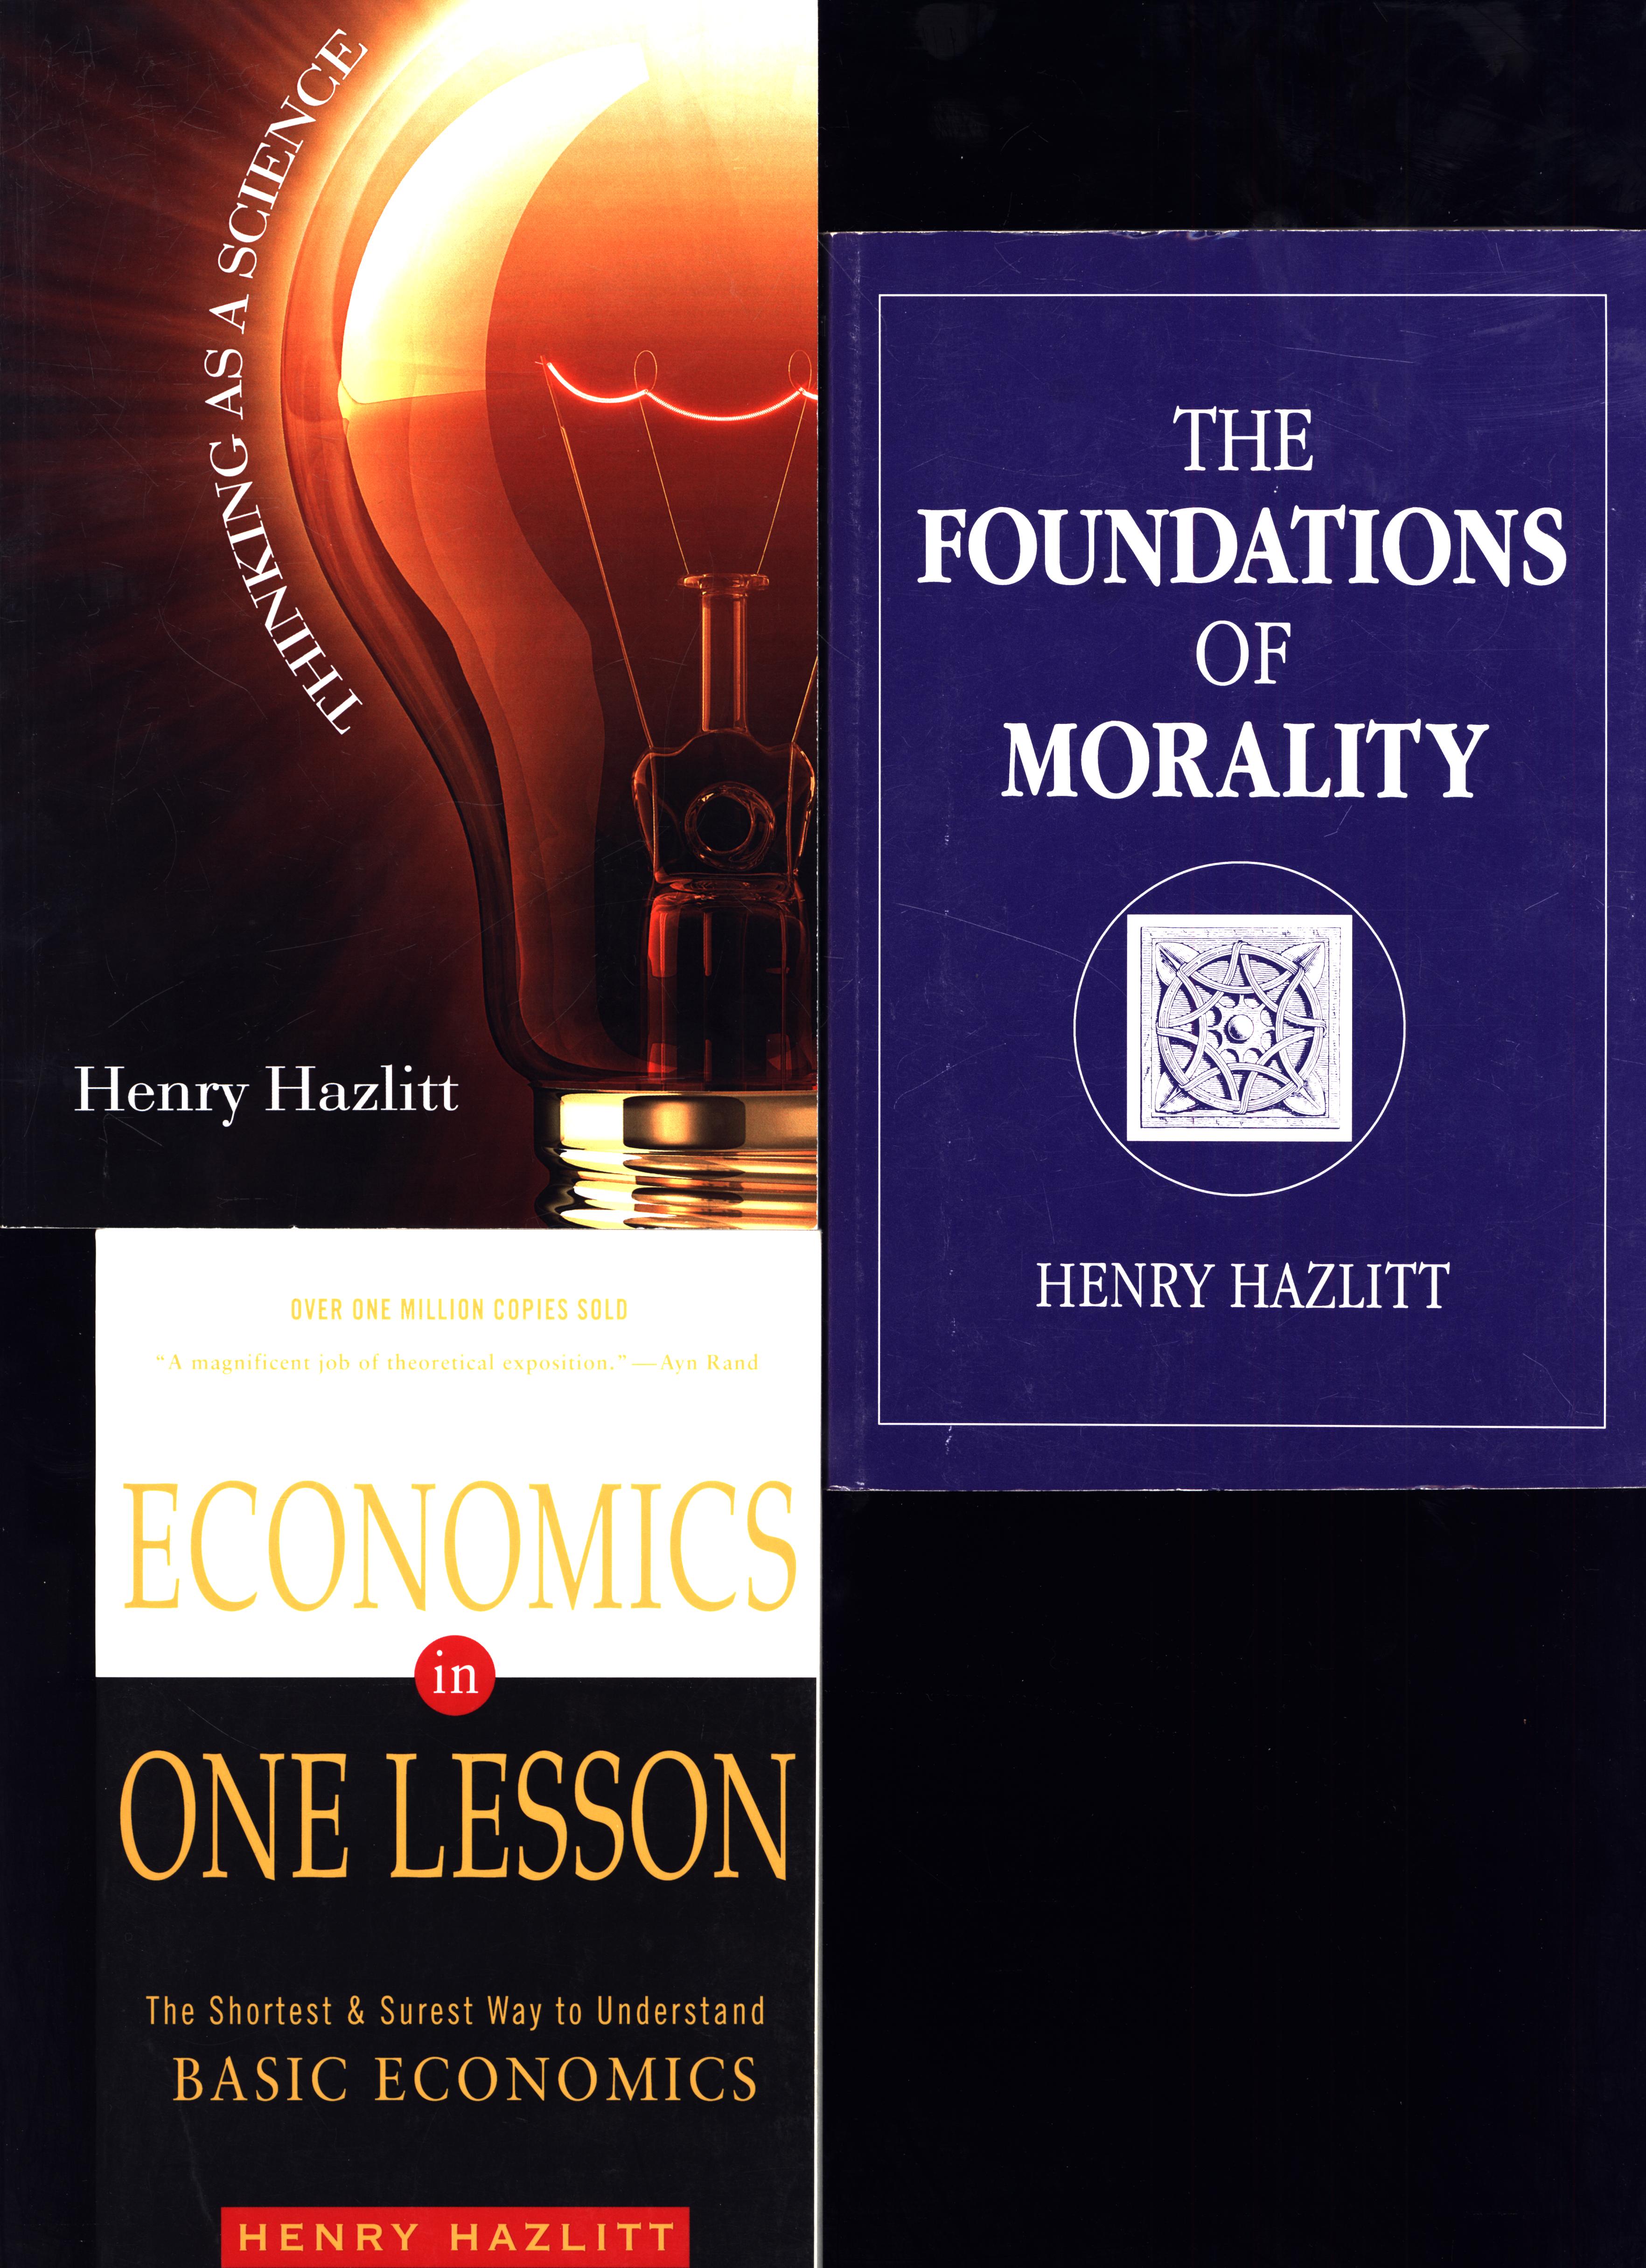 The Foundations of Morality AND A SECOND HAZLITT TRADE PAPERBACK, Thinking As a Science, AND A THIRD HAZLITT TRADE PAPERBACK, Economics In One Lesson - Hazlitt, Henry